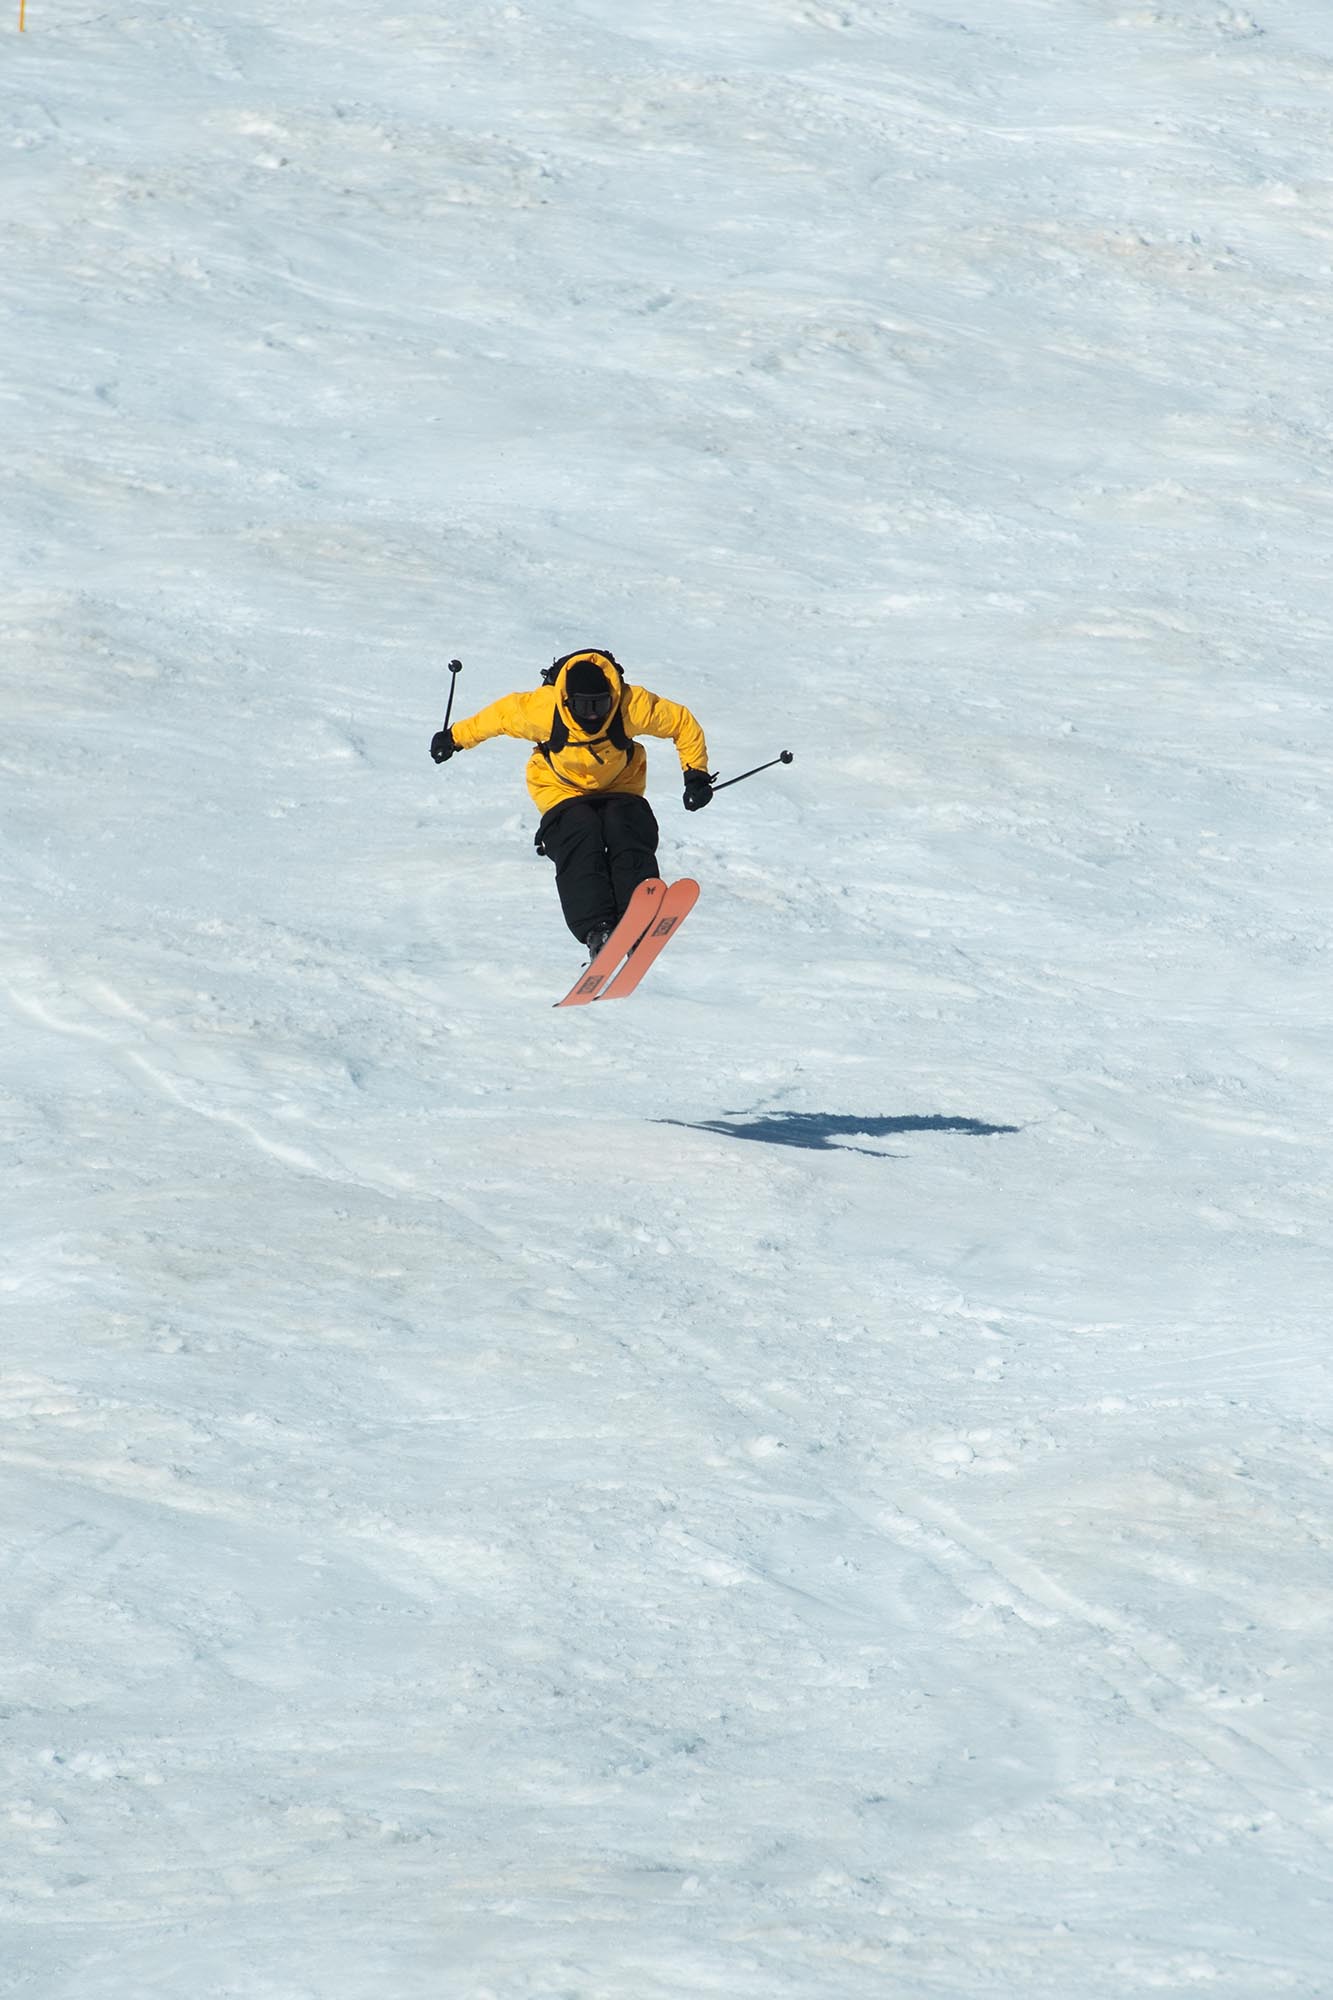 ‘PRETTY TIGHT’: ANOTHER JAW DROPPER FROM CANDIDE THOVEX